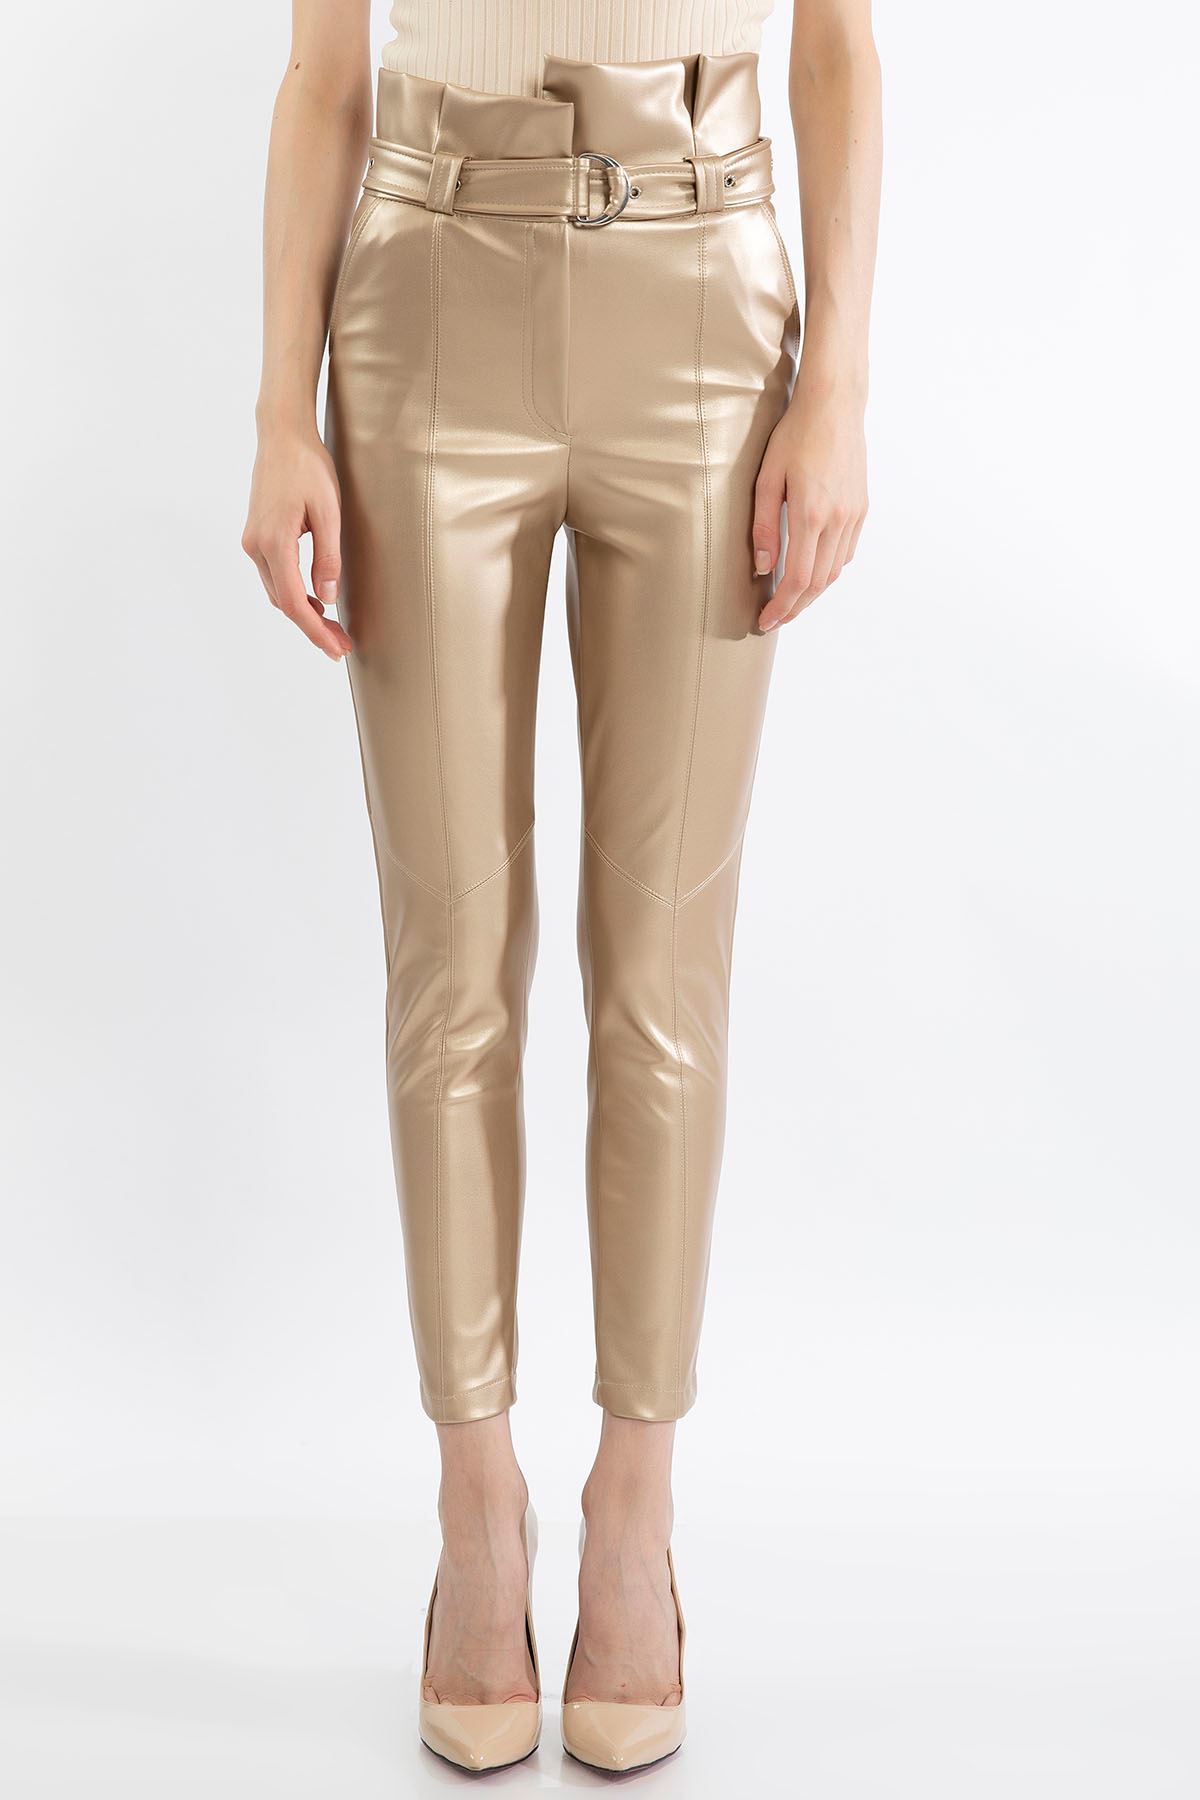 Zara Leather Fabric Ankle Length Tight Fit High Waist Belt Women'S Trouser - Gold